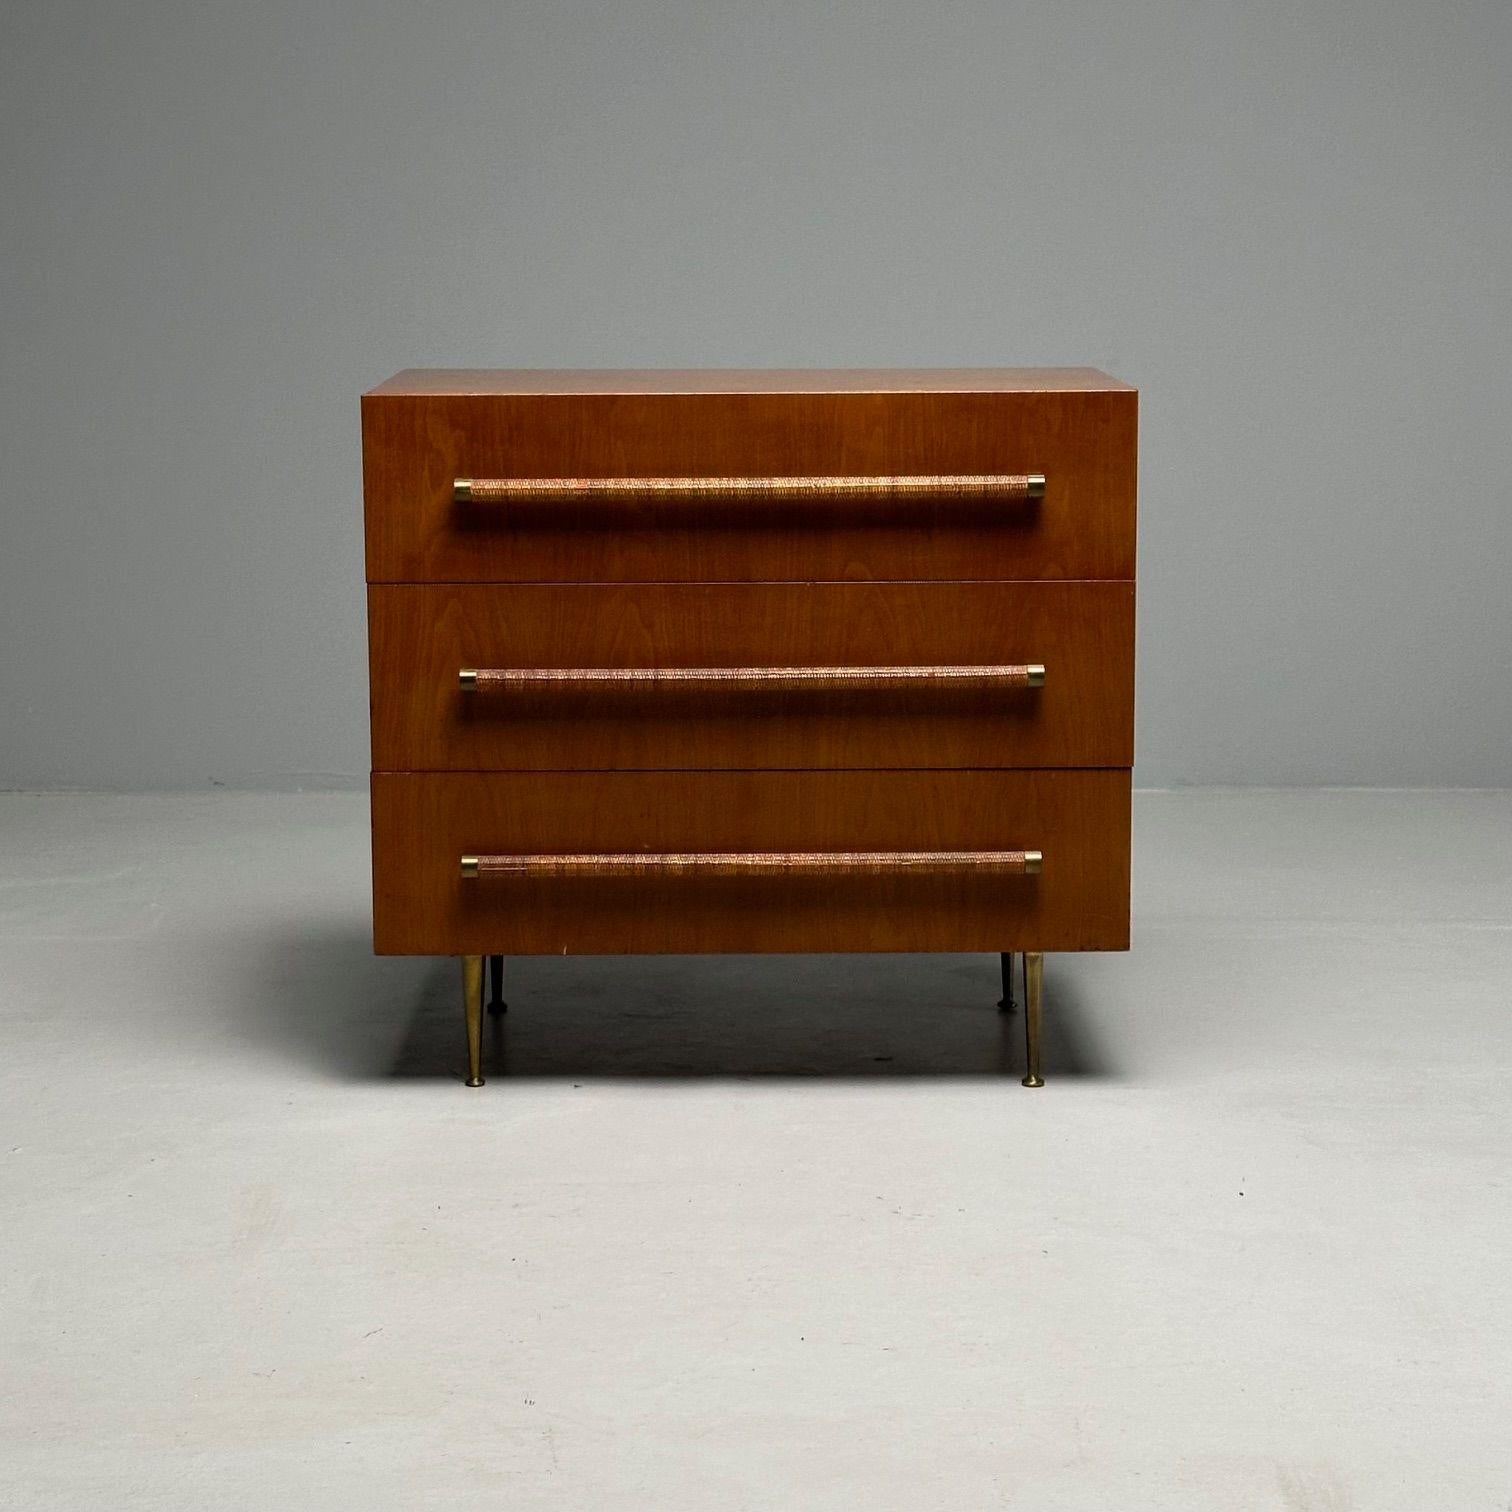 TH Robsjohn-Gibbings, Widdicomb Mid-Century Modern, Walnut, Cane, Chest, Cabinet In Good Condition For Sale In Stamford, CT